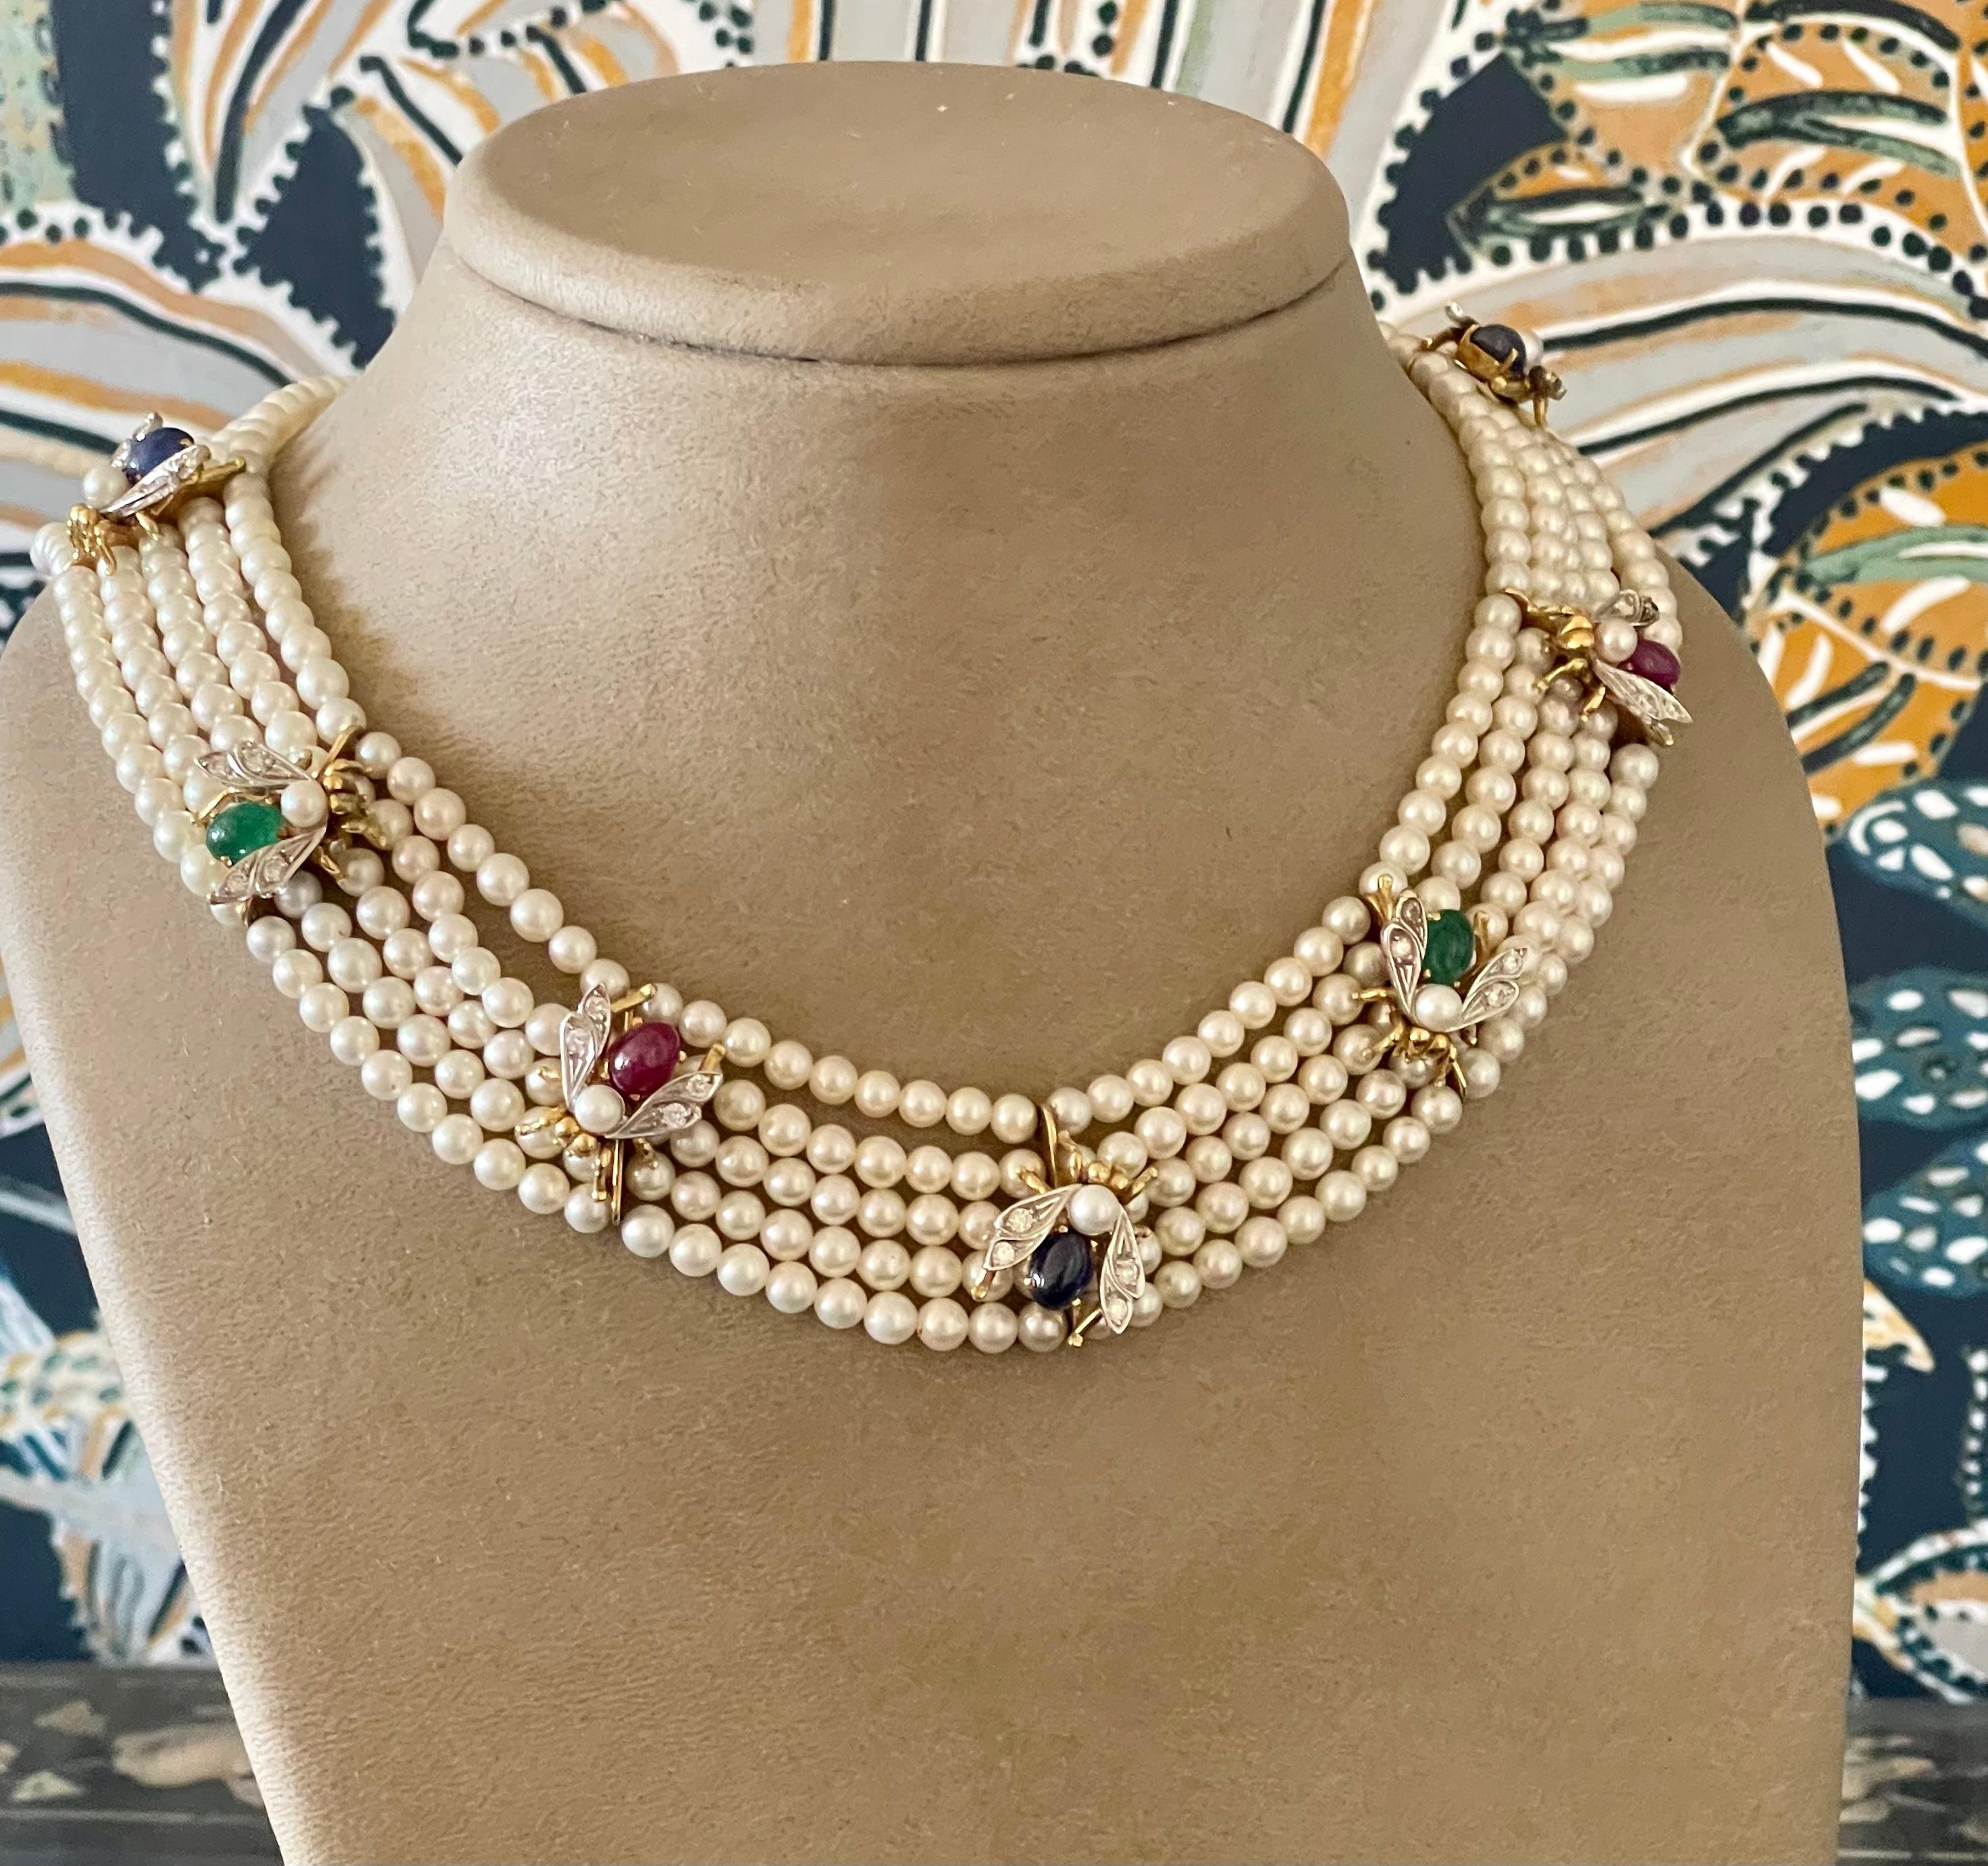 A delightful Vintage Choker necklace from the 1950s in 18 K yellow Gold featuring 5 strands of cultured pearls (4-4.5mm) . The necklace is decorated with 7 bees in 18 K yellow Gold. The body of the bees consists of Sapphire, Rubies and emeald